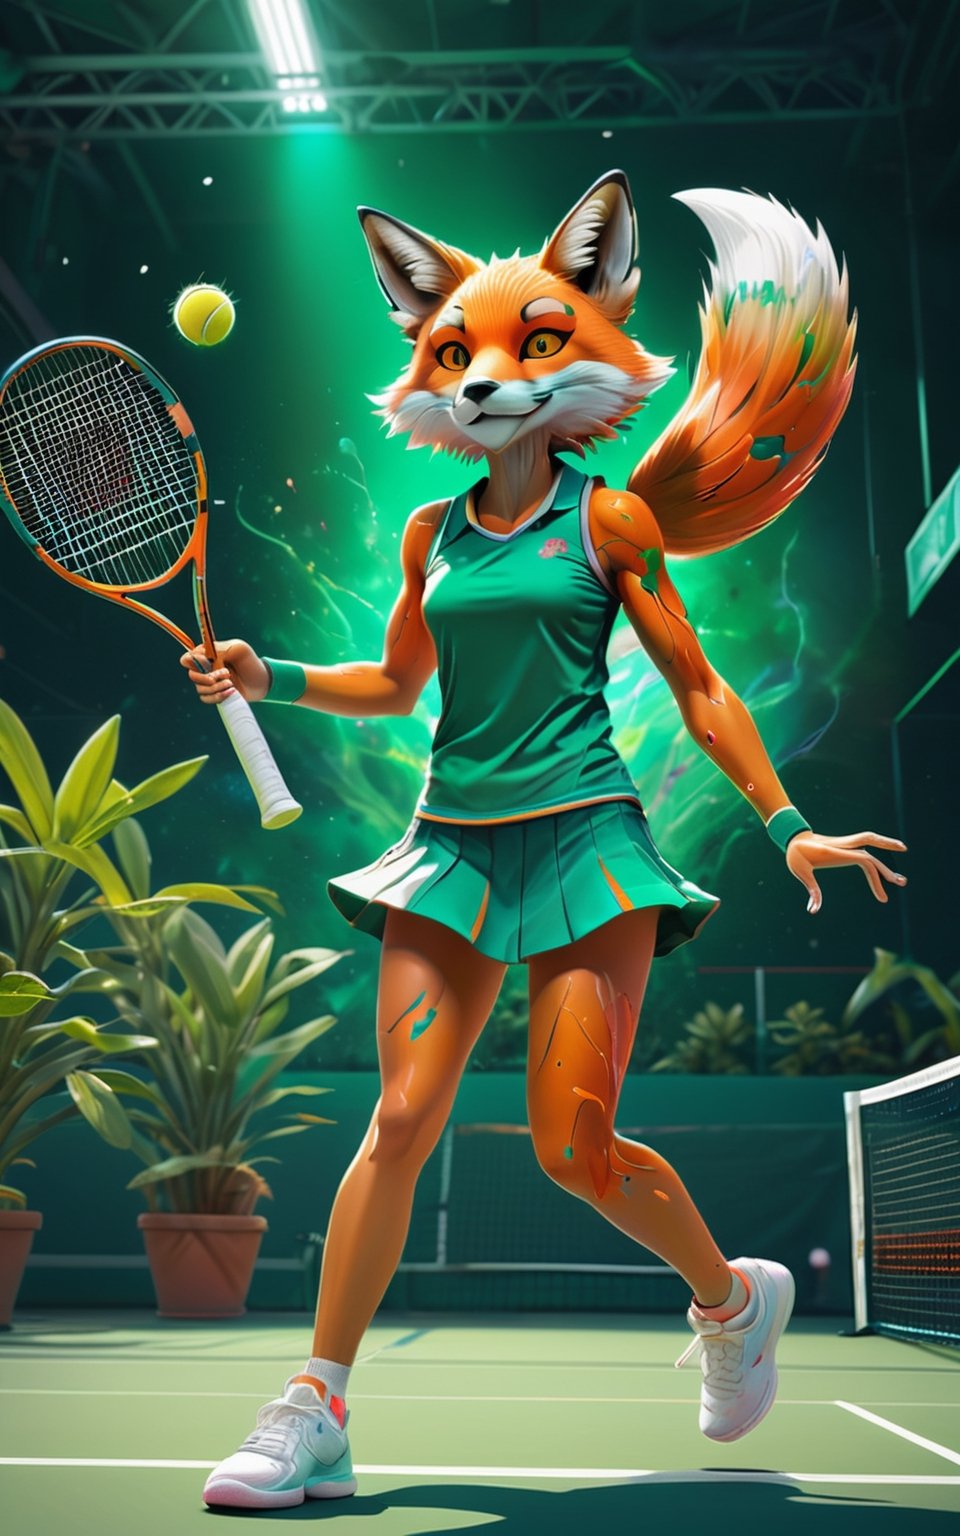 Tiger tennis player in tennis court, (masterpiece:1.1), (highest quality:1.1), (HDR:1.0), extreme quality, cg, (negative space), detailed face+eyes, 1girl, fox ears, (plants:1.18), (fractal art), (bright colors), splashes of color background, colors mashing, paint splatter, complimentary colors, neon, compassionate, electric, limited palette, synthwave, fine art, tan skin, full body, (green and orange:1.2), time stop, sy3, SMM